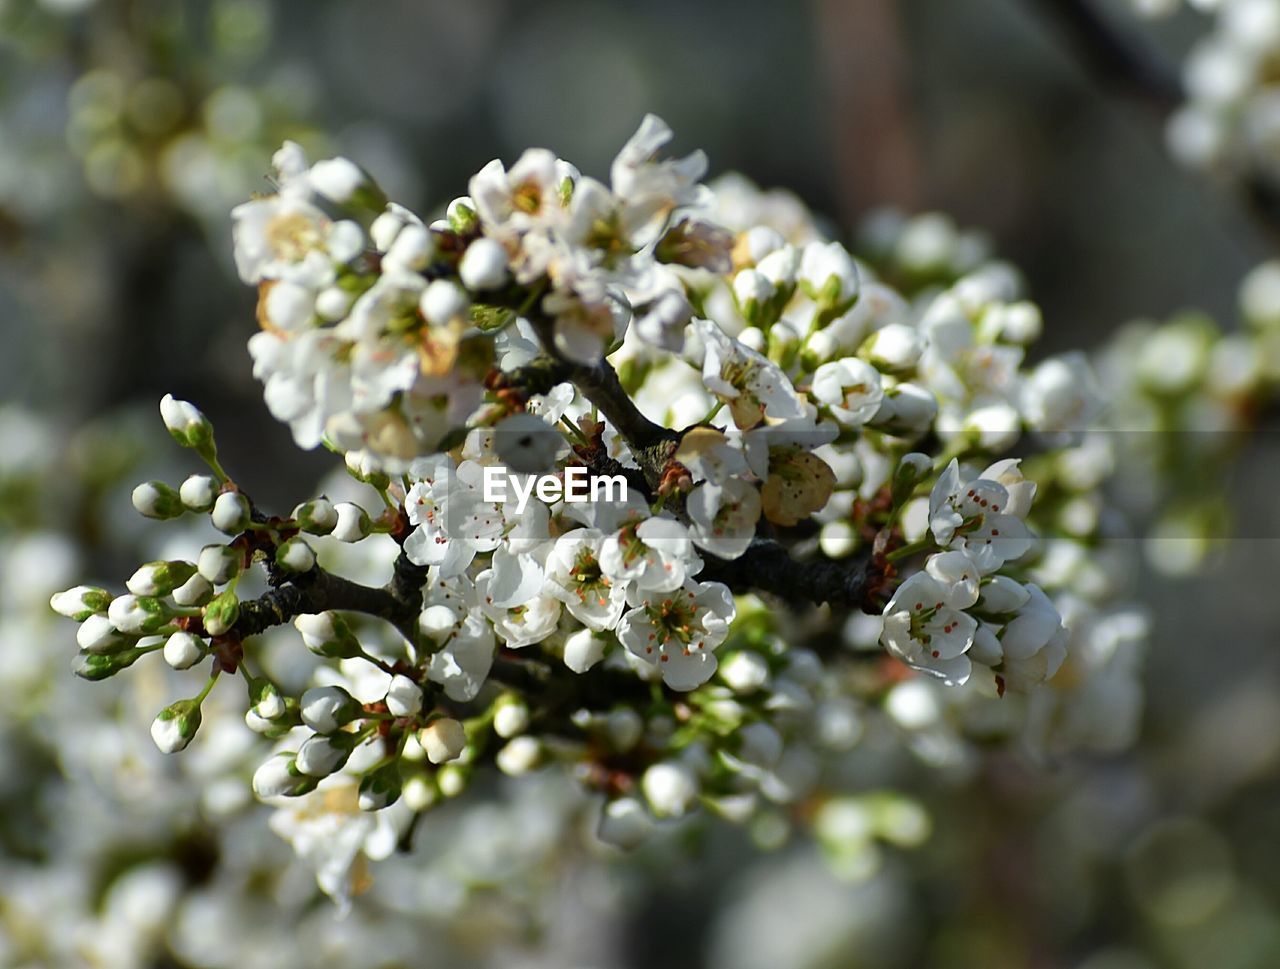 CLOSE-UP OF WHITE FLOWERS ON TREE